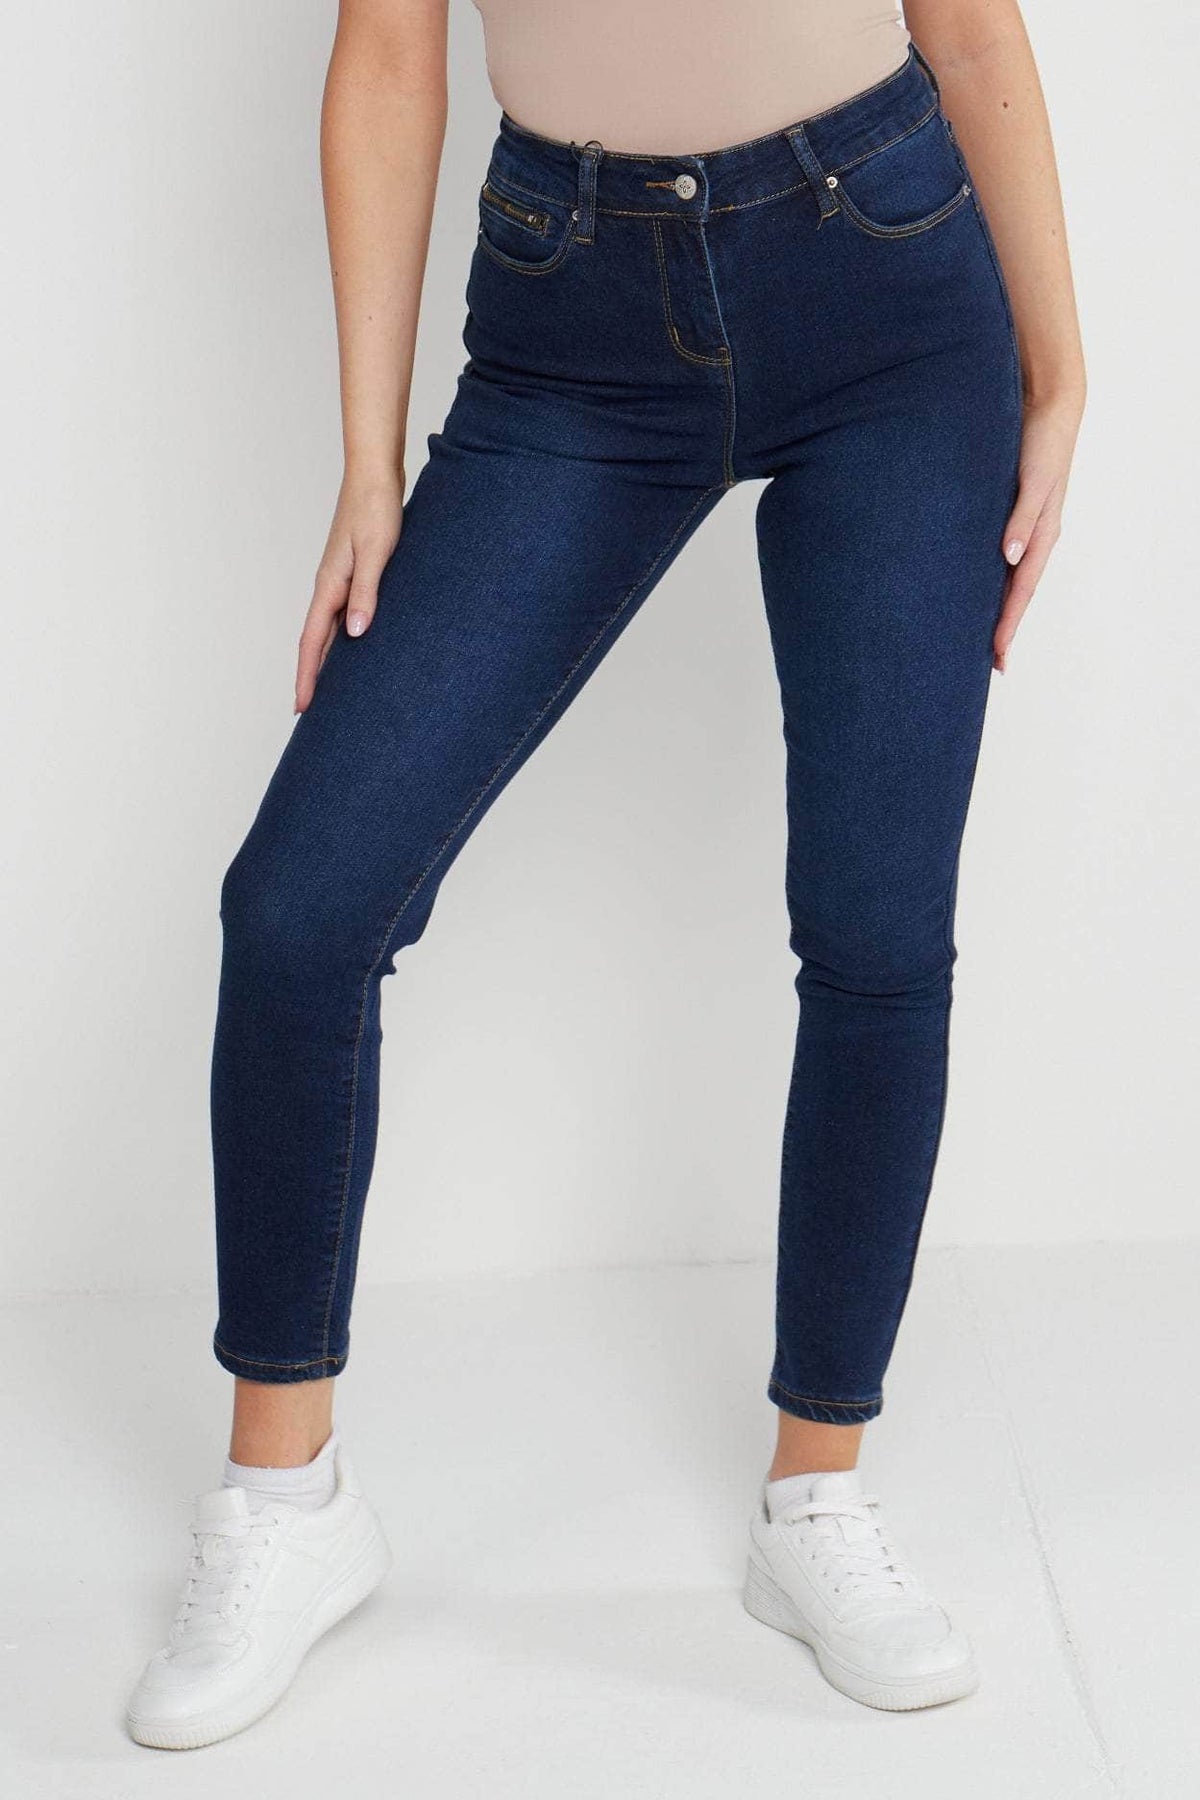 Saloos Trousers Denim / 12 Tapered Mid-High Waist Jeans